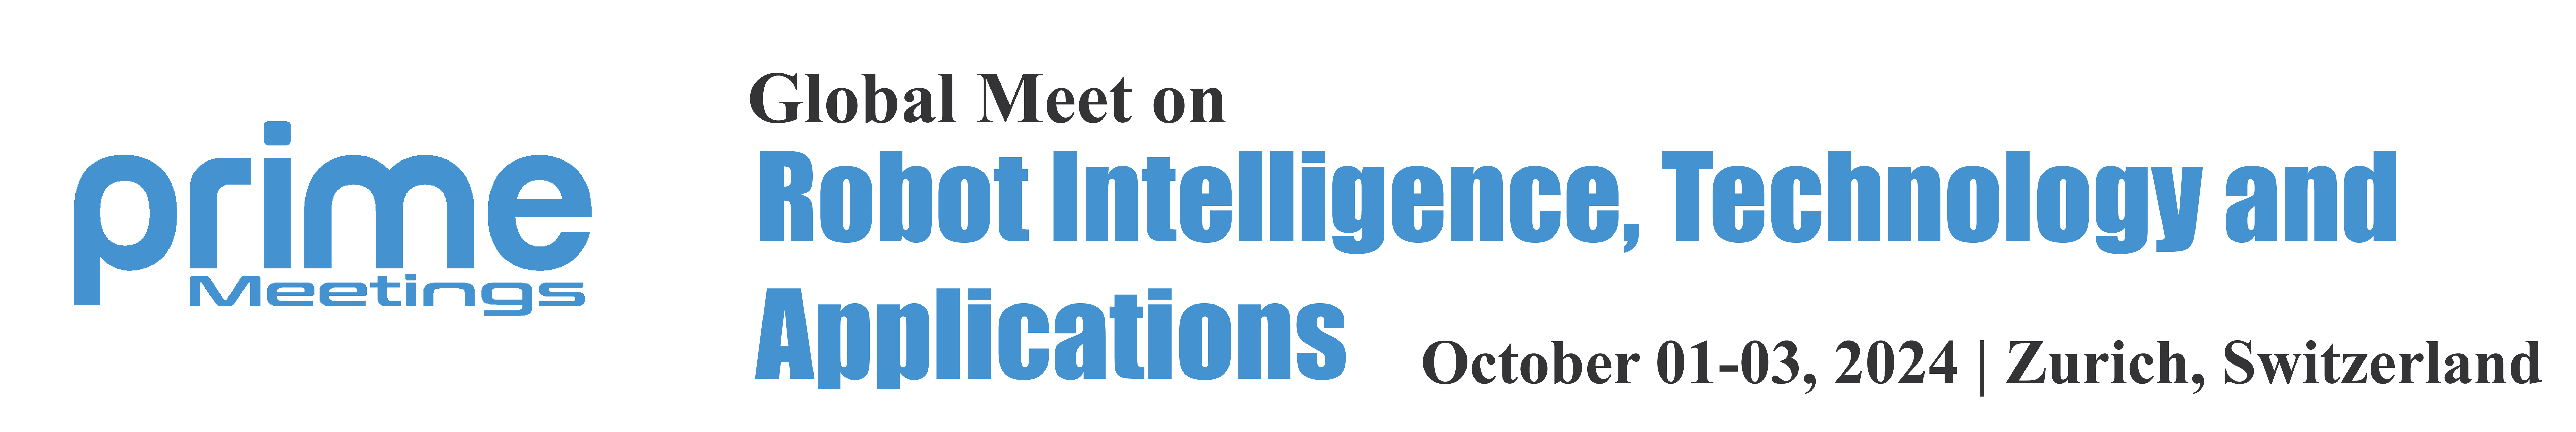 Global Meet on Robot Intelligence, Technology and Applications